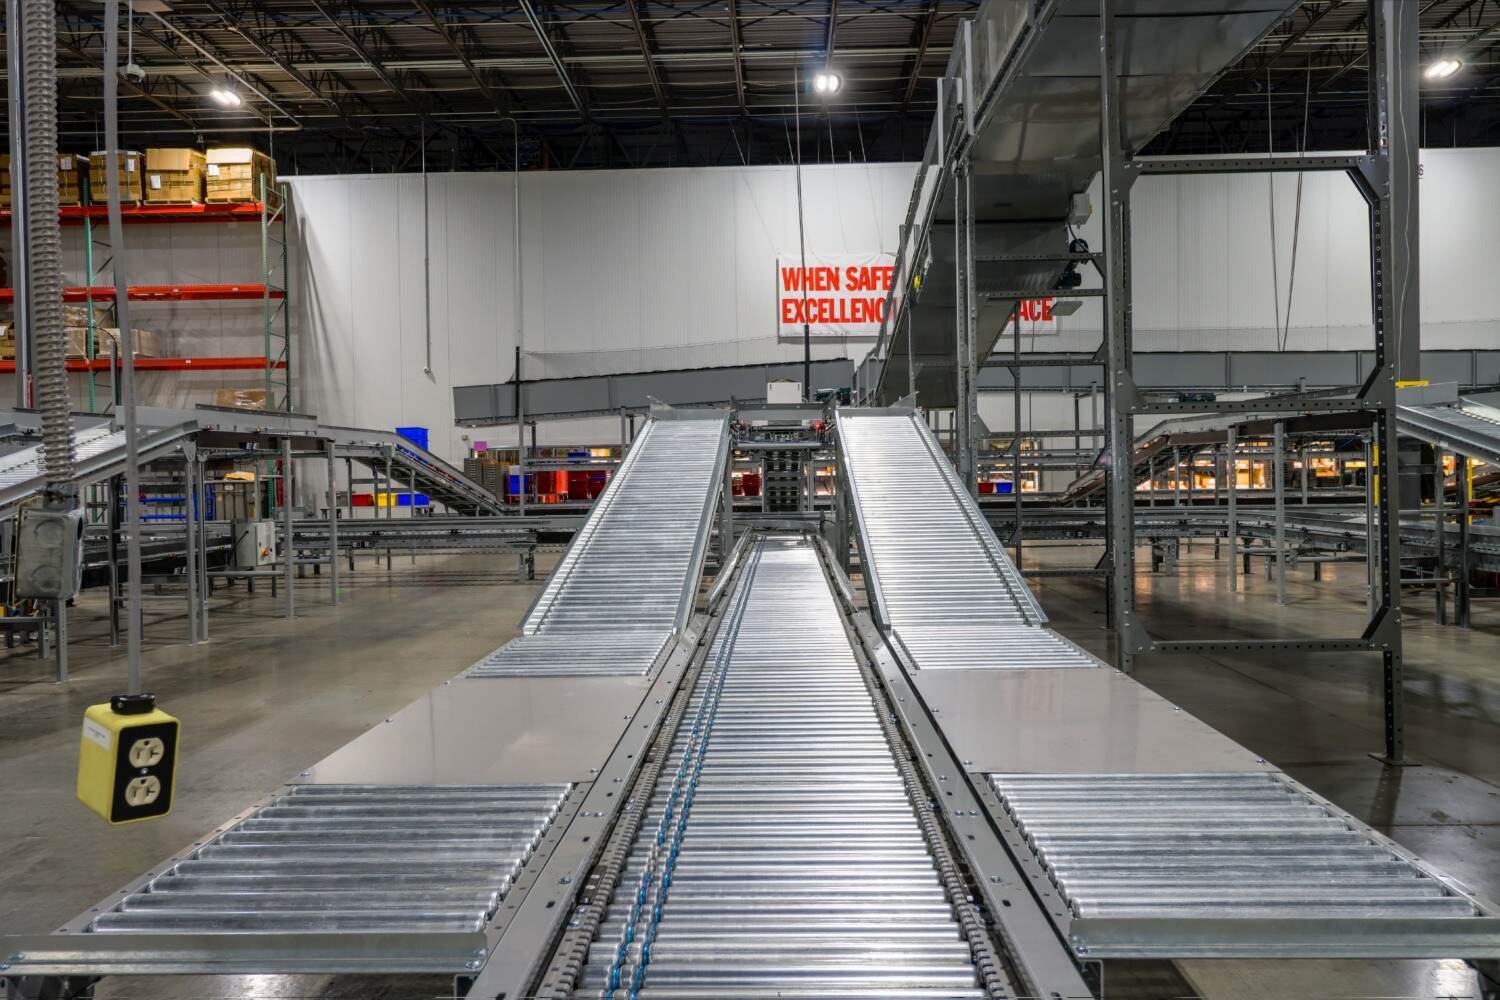 Case Study: 3PL In Need of Updated Conveyor Equipment and Design